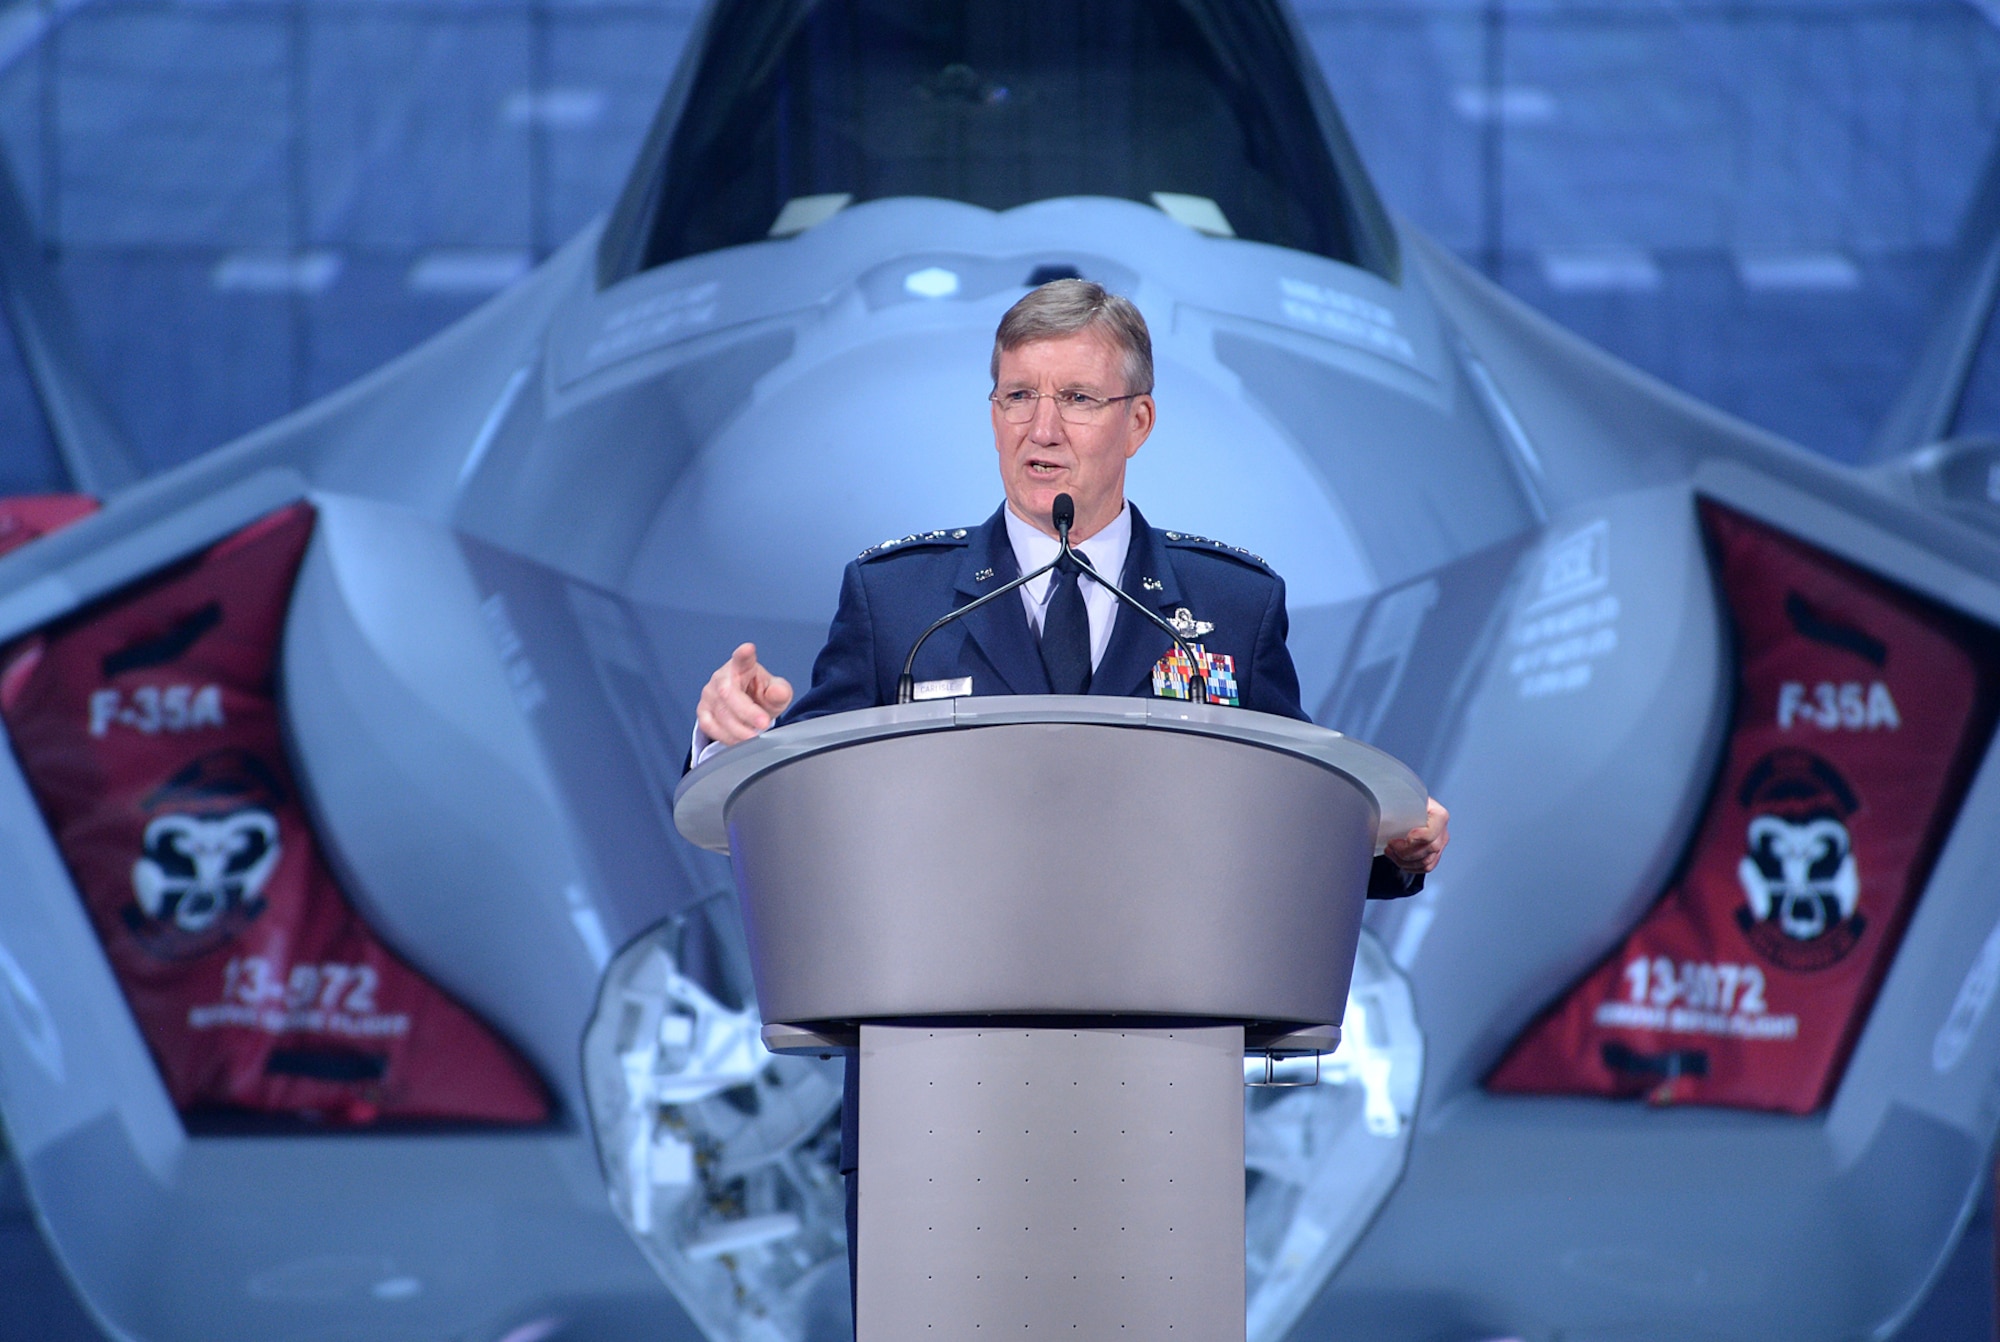 Gen. Hawk Carlisle, the commander of Air Combat Command, speaks at the arrival ceremony for the F-35 Lightning II at Hill Air Force Base, Utah, Oct. 14, 2015. The ceremony marked the formal beginning of F-35 operations at Hill, and commemorated the arrival of the first combat-coded F-35 aircraft which arrived at Hill Sept. 2. (U.S. Air Force photo/R. Nial Bradshaw)